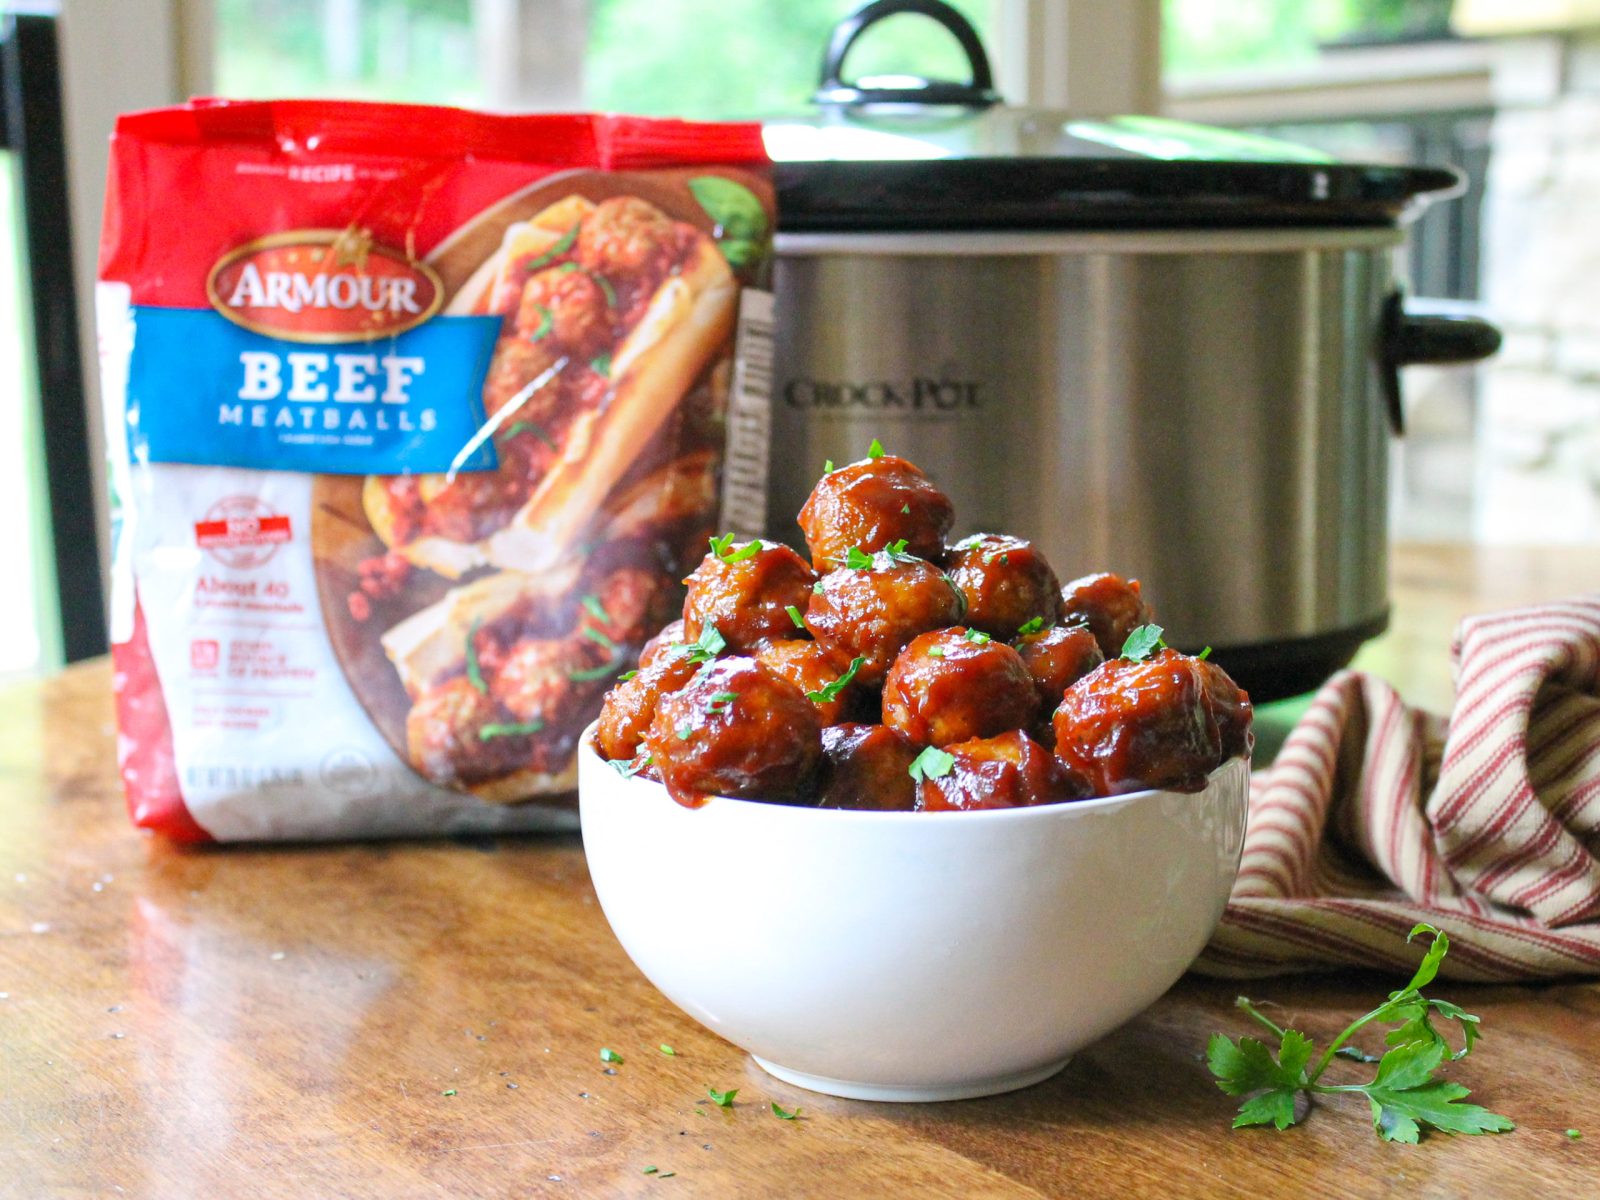 Serve Up Great Taste At Your Holiday Gathering – Serve Up Armour Meatballs & Save Now At Publix